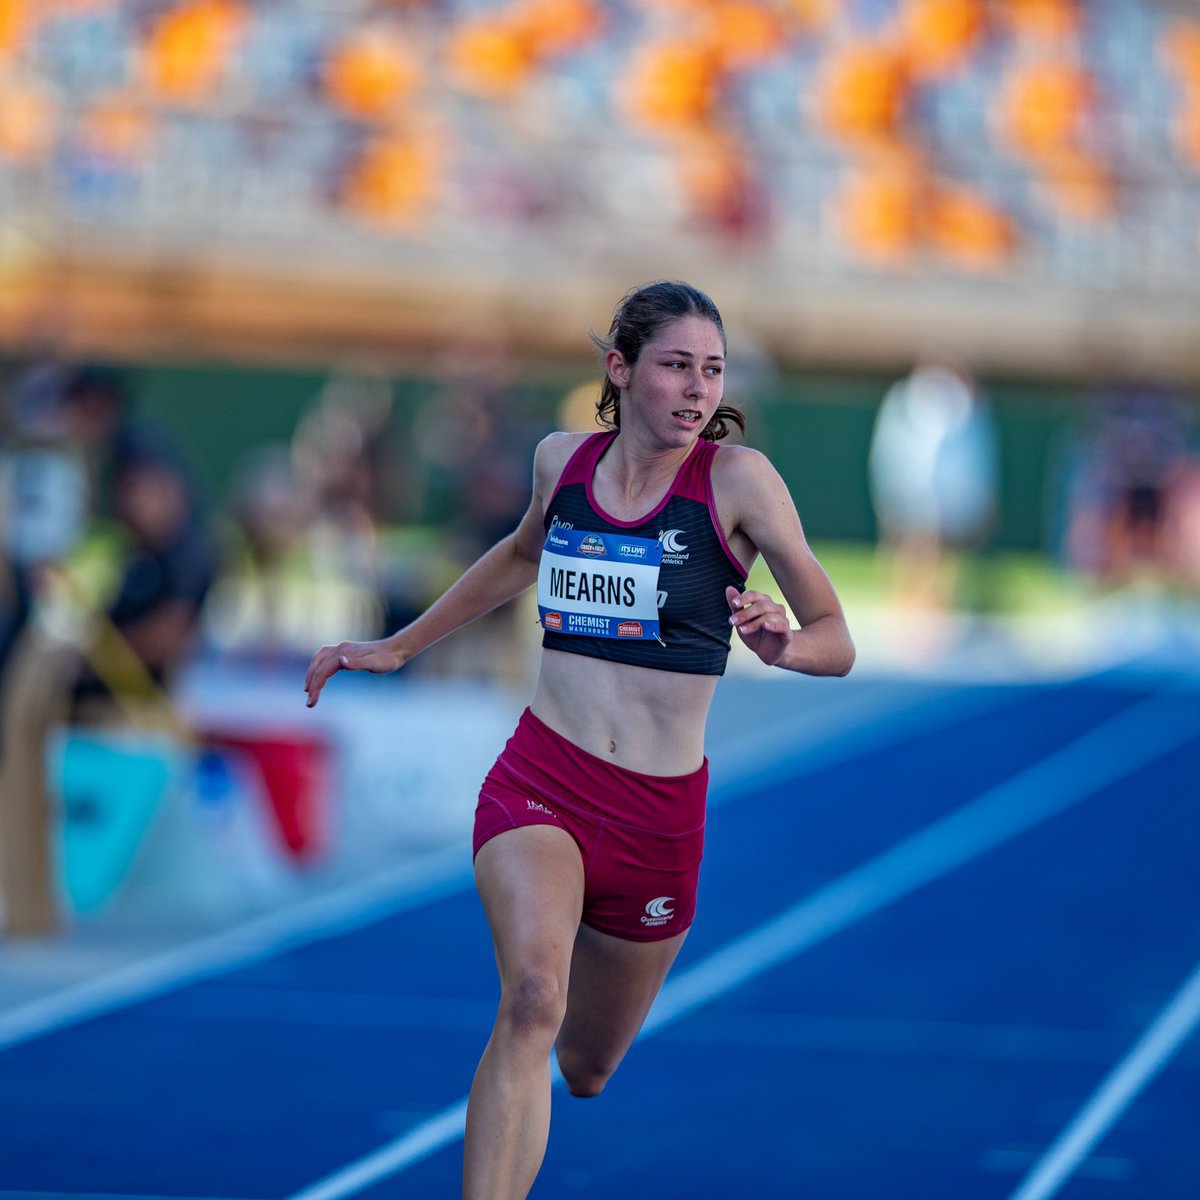 The future stars of the QLD track & field scene are getting ready to set WA Athletics Stadium ablaze at the 2023 Chemist Warehouse Australian All Schools Athletics Championships. Get to know Team @qldathletics here ⭐bit.ly/QLD-23AllSchoo… #ThisIsAthletics #WAtheDreamState